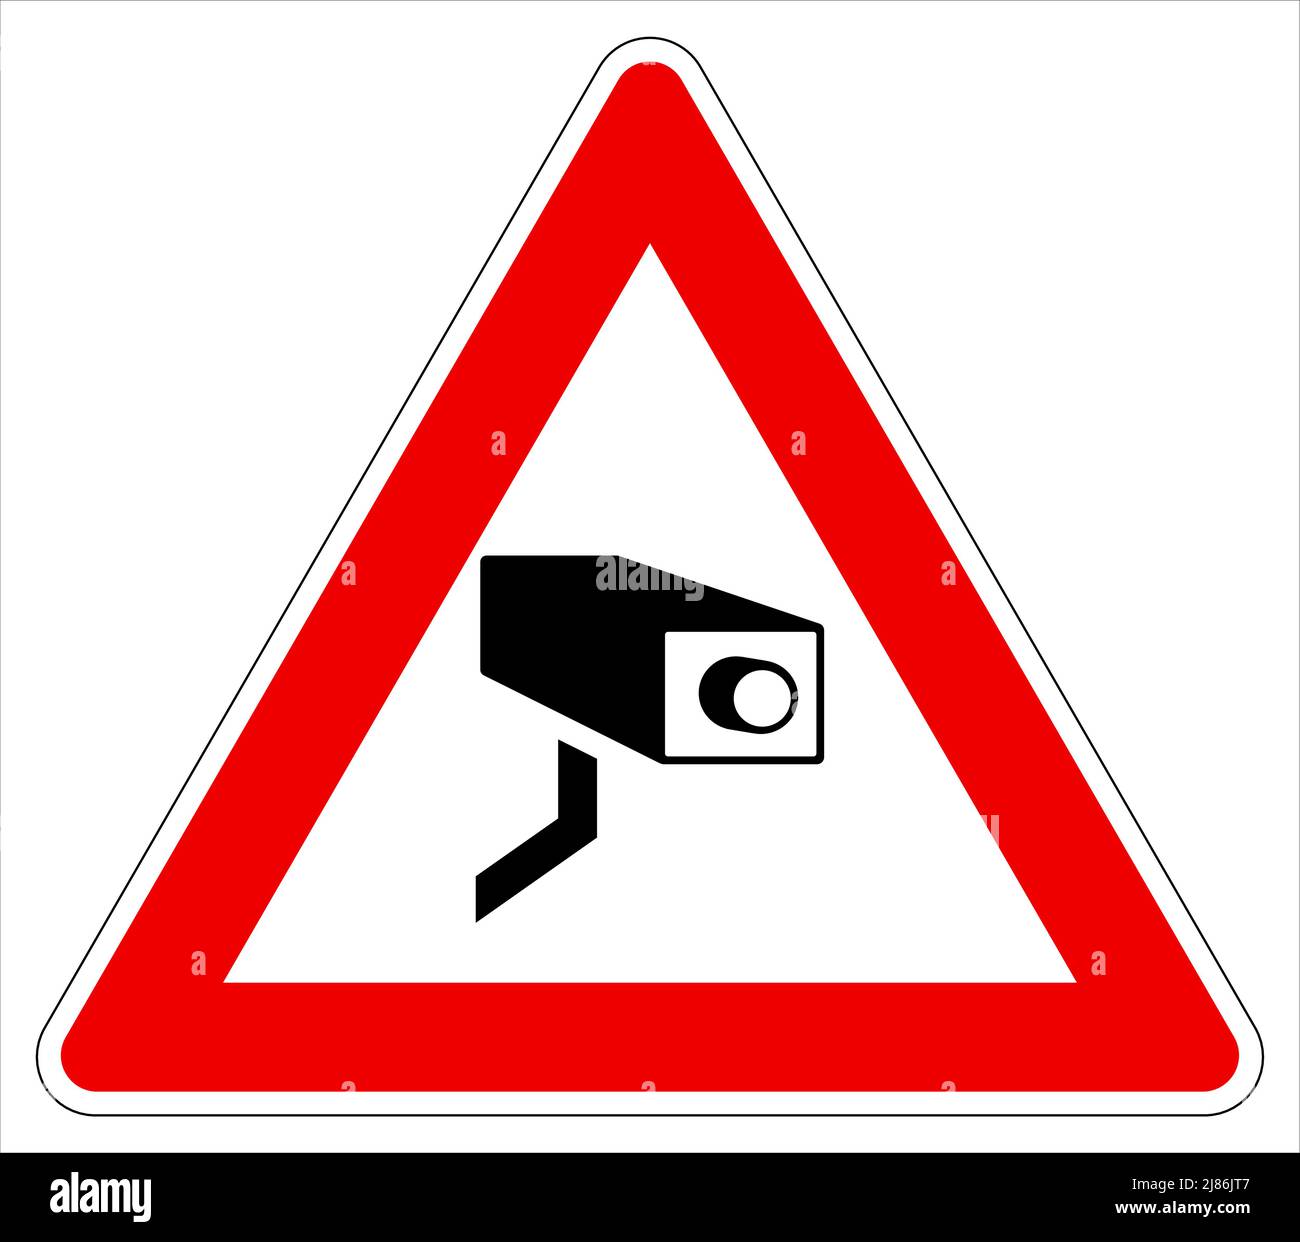 CCTV security camera in red triangle icon Stock Vector